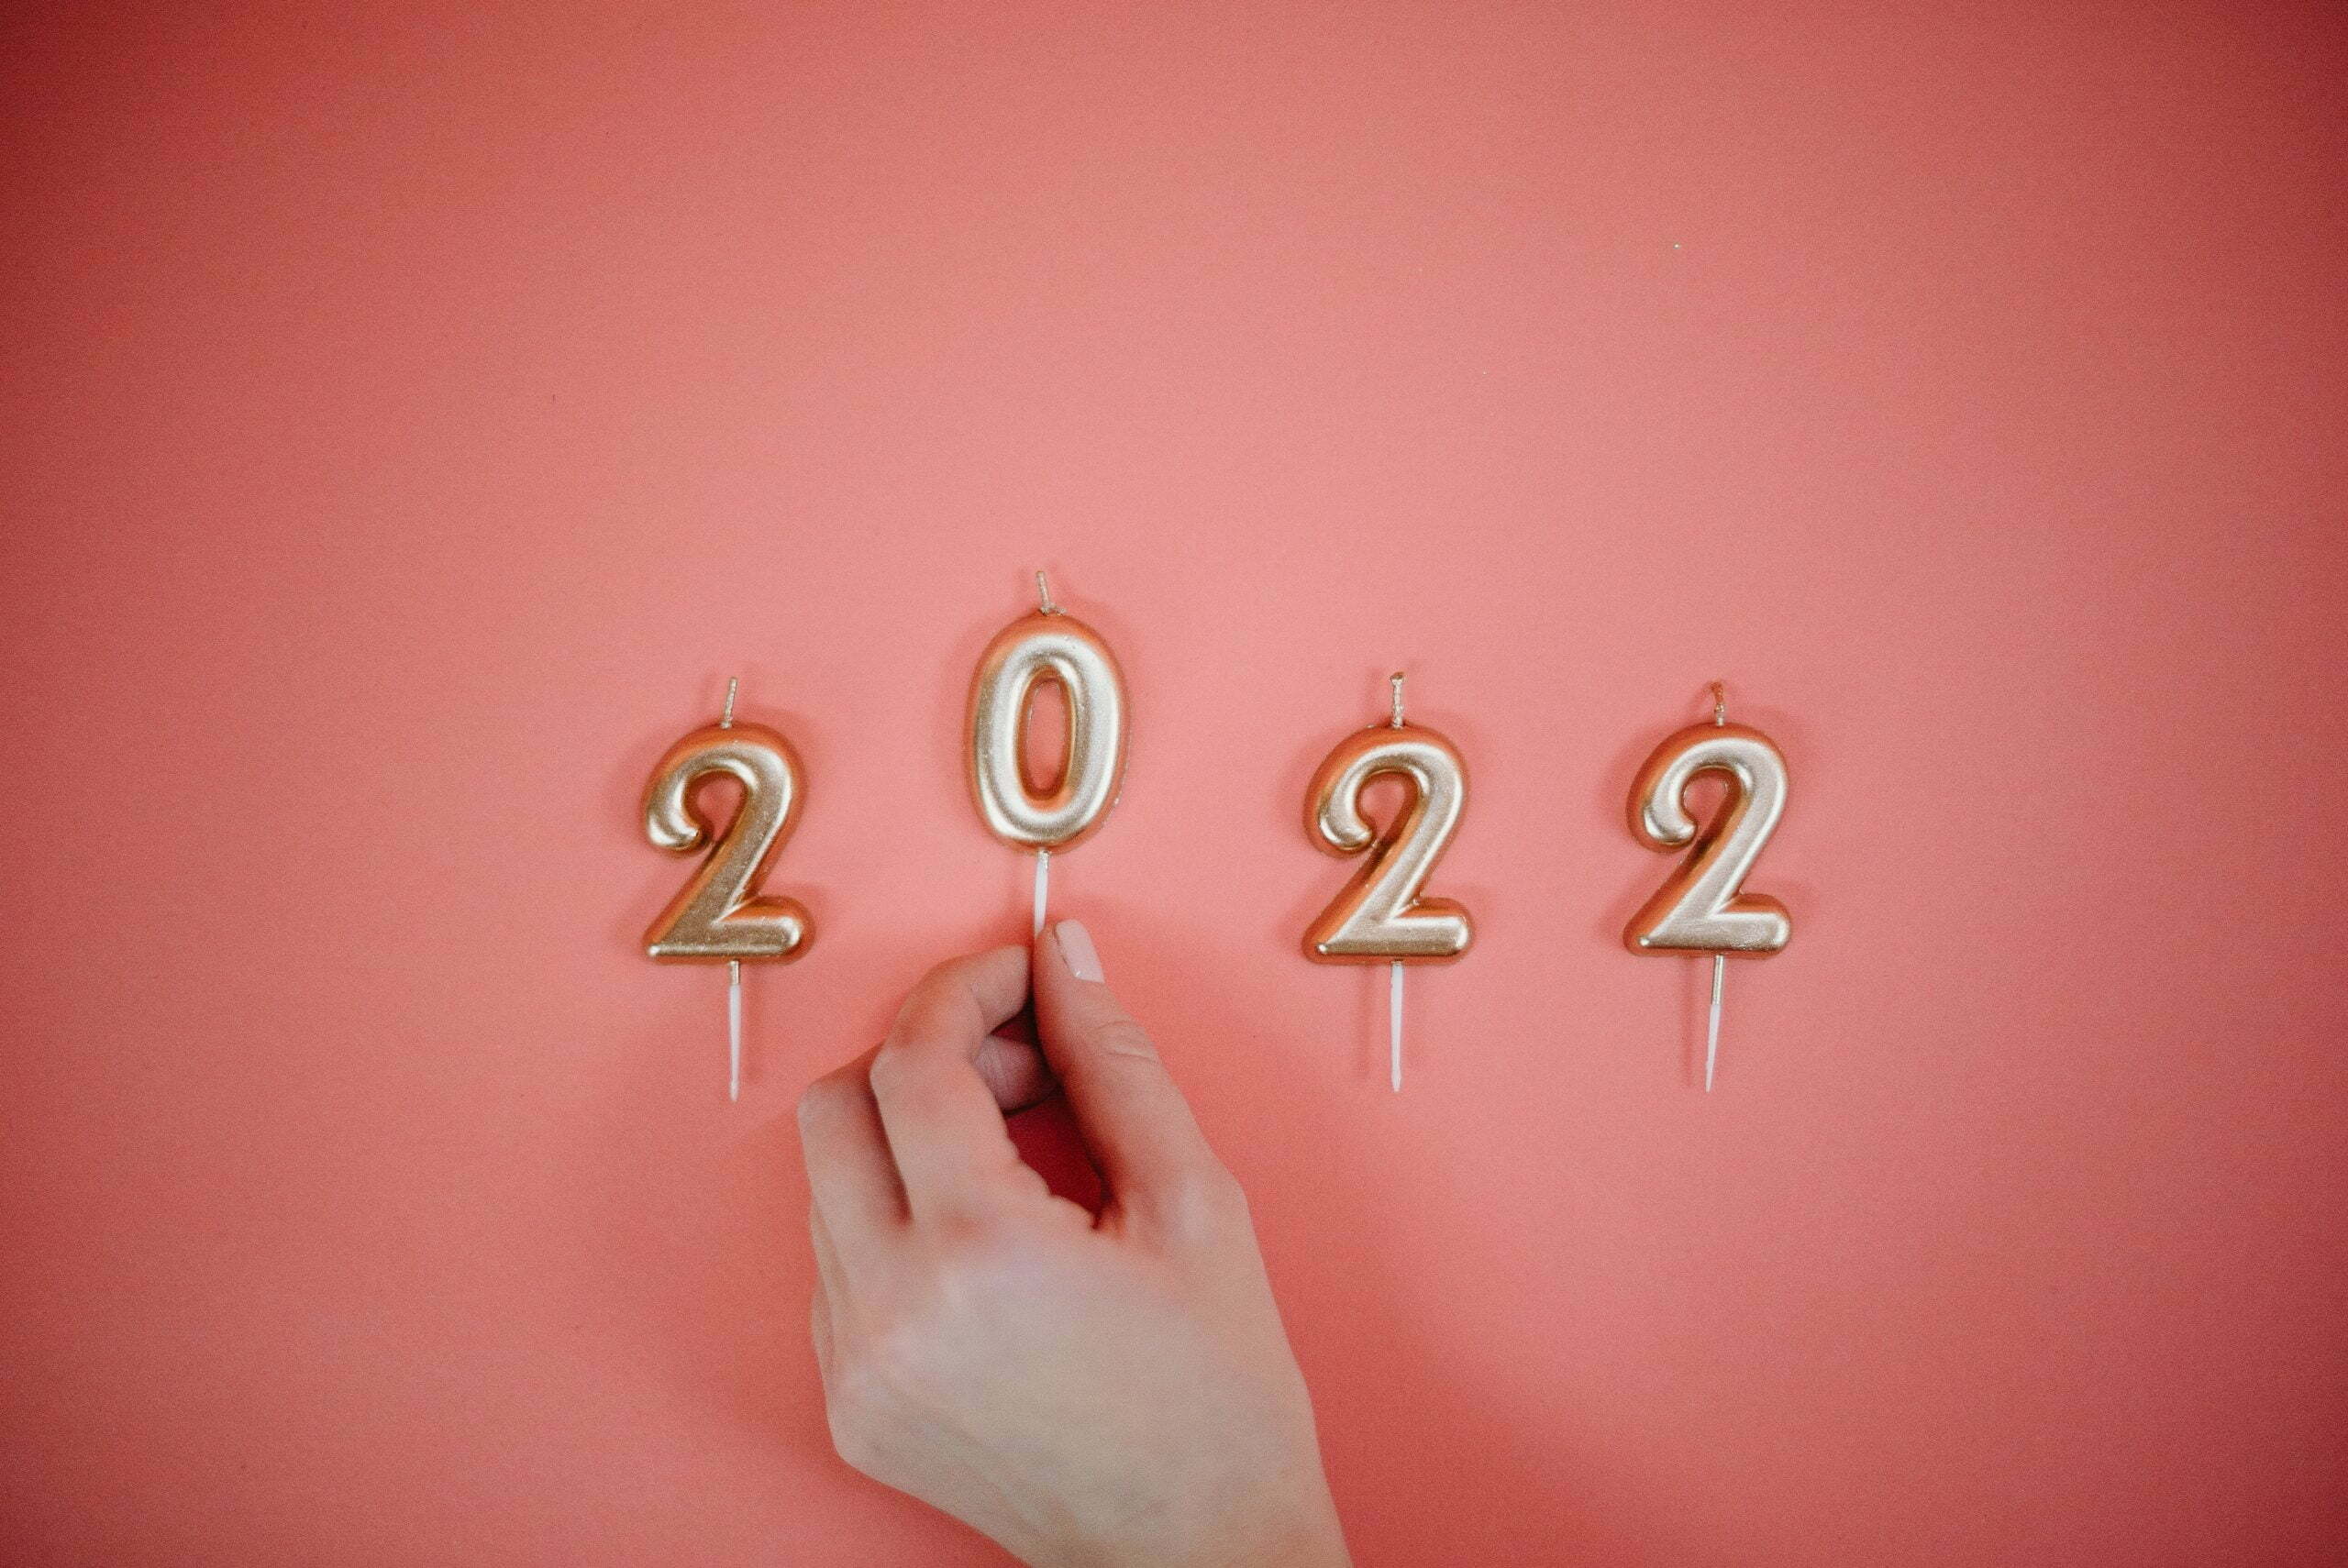 What are your resolutions for 2022?